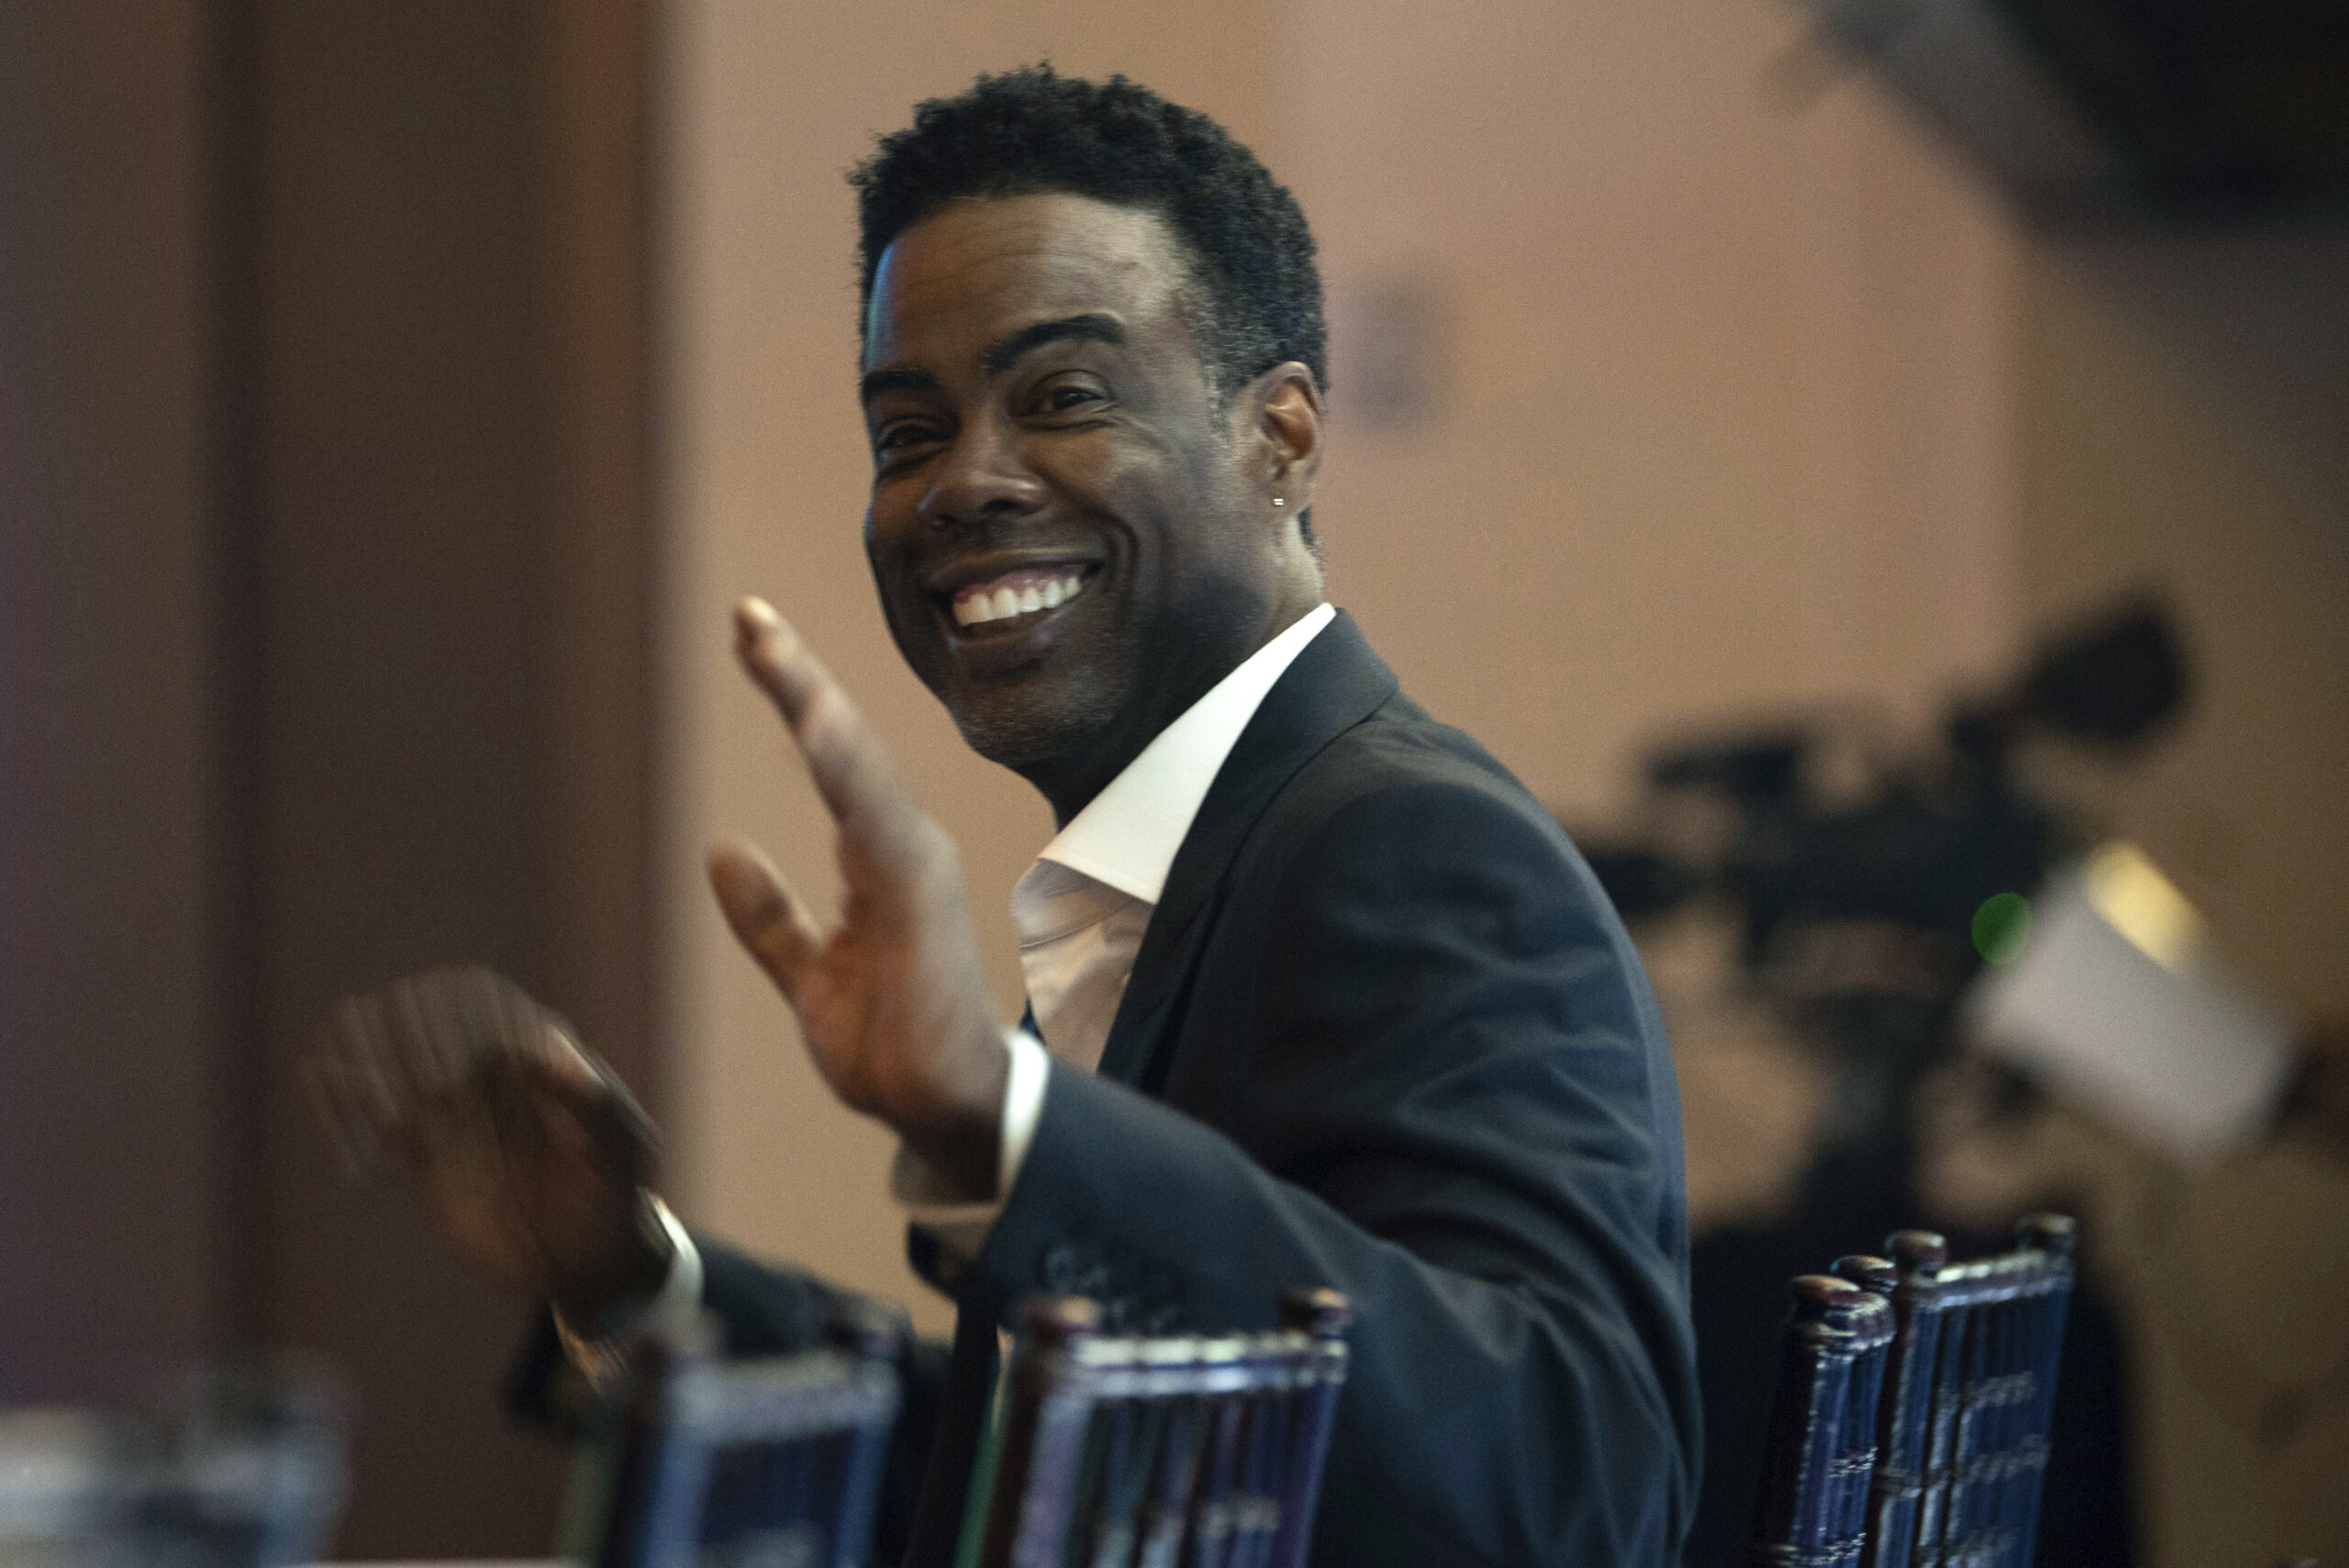 Chris Rock Holds Nothing Back In His Recent Comedy Special Selective